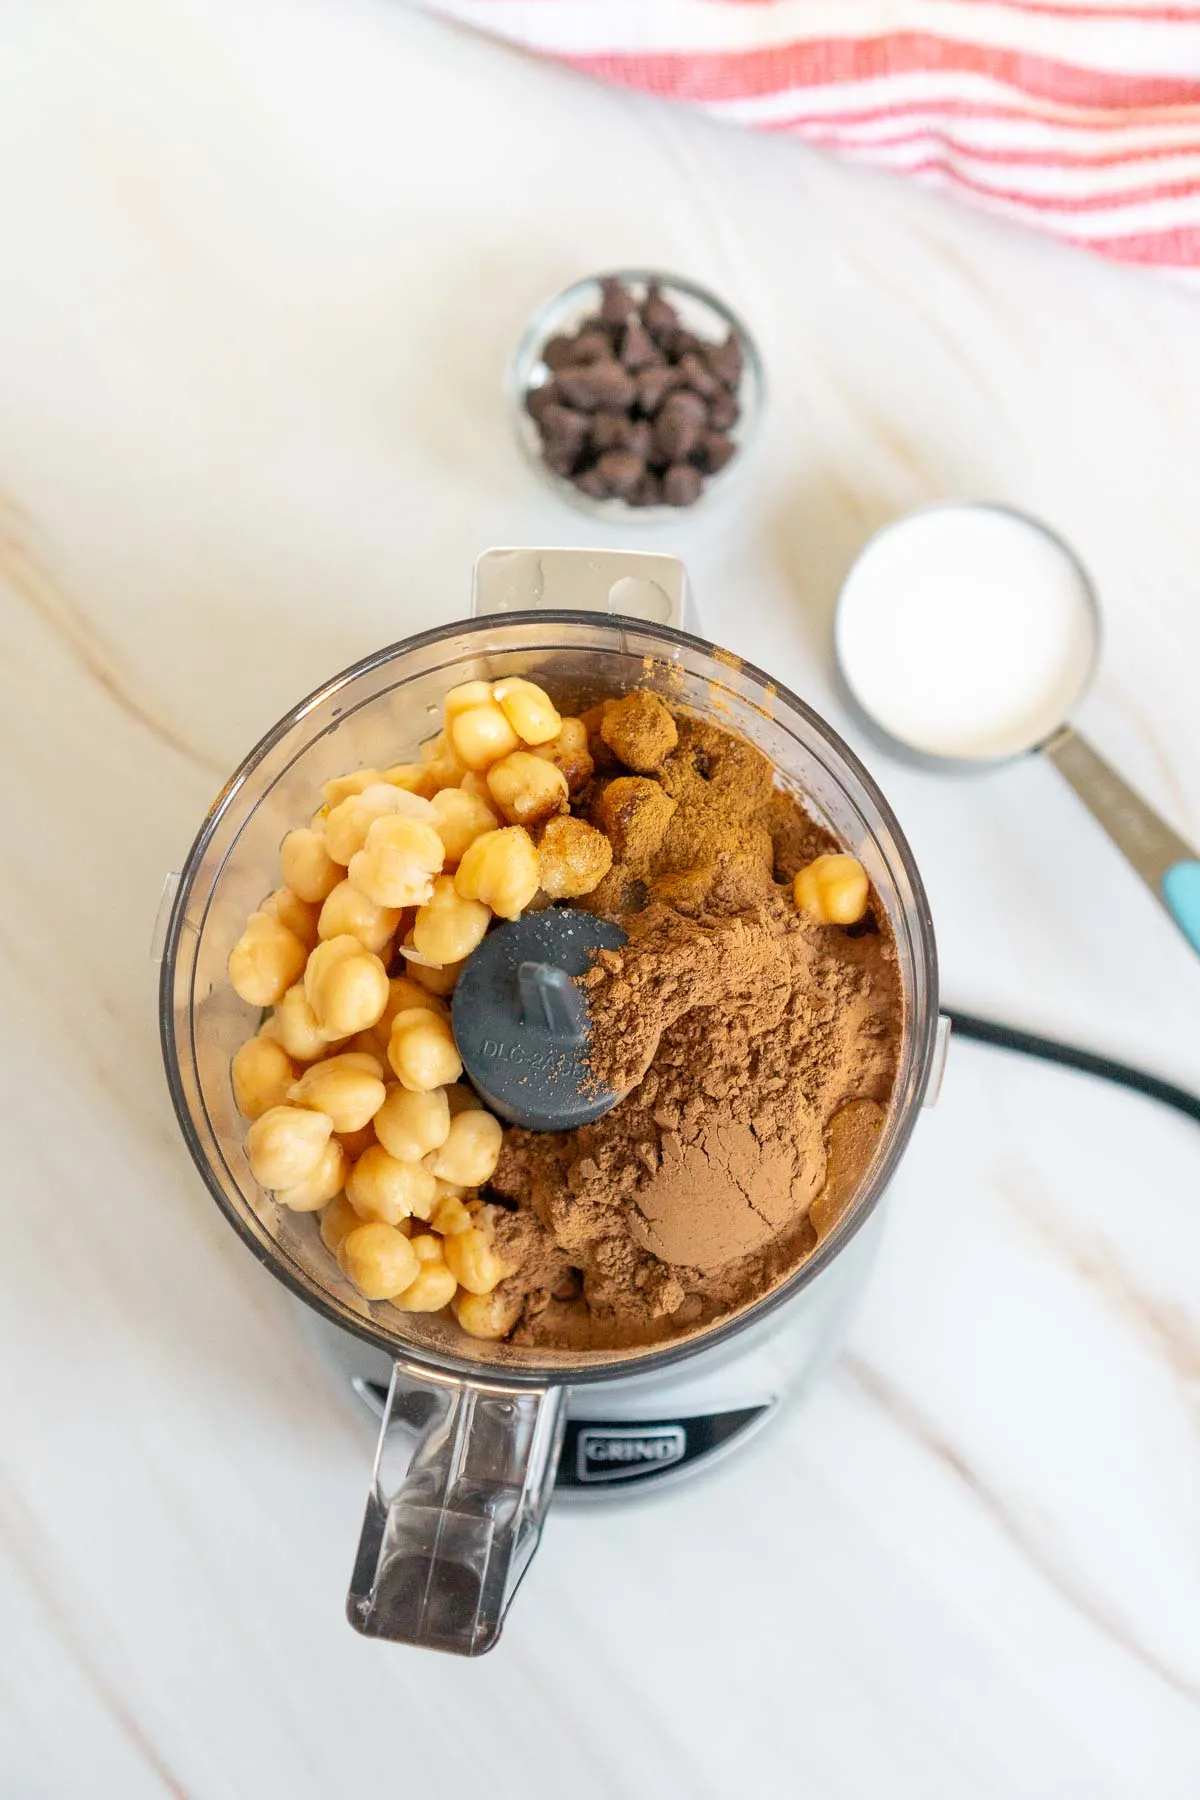 Chocolate hummus ingredients in a blender: chickpeas, cocoa powder, maple syrup, vanilla extract.